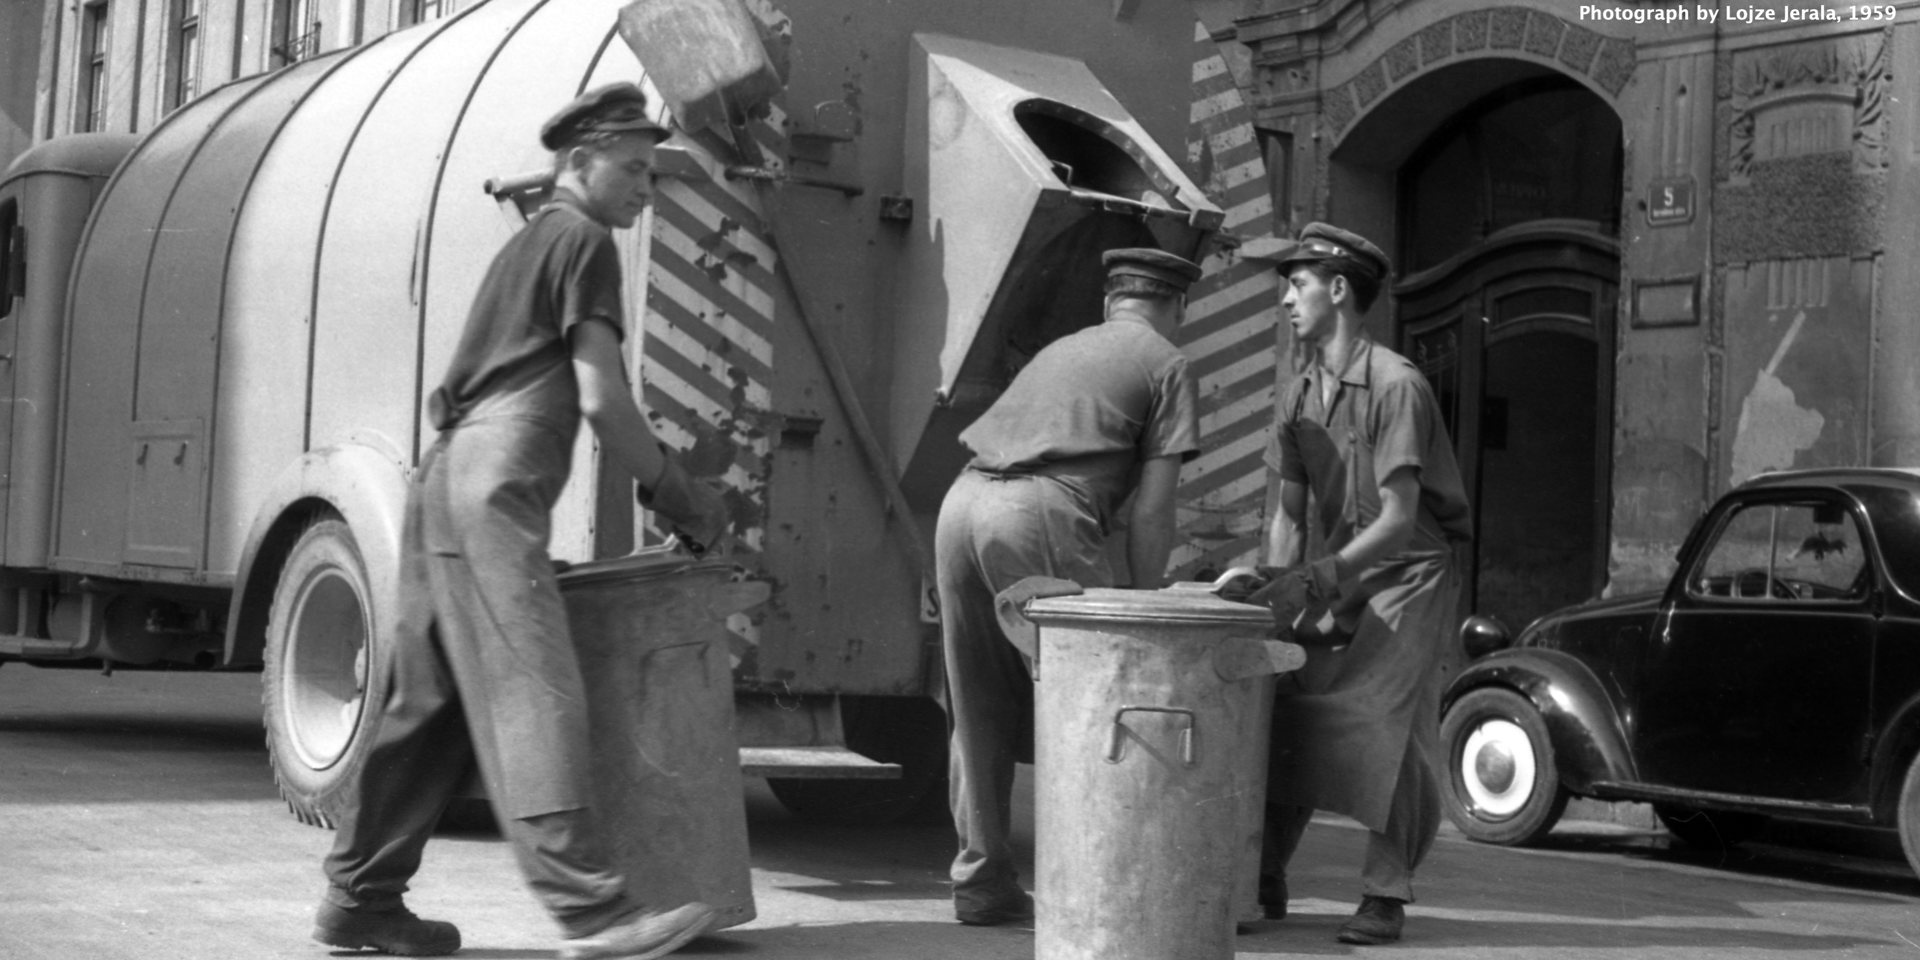 A photograph by Lojze Jerala, of bins being emptied into a lorry in Ljubljana, Slovenia, 1959